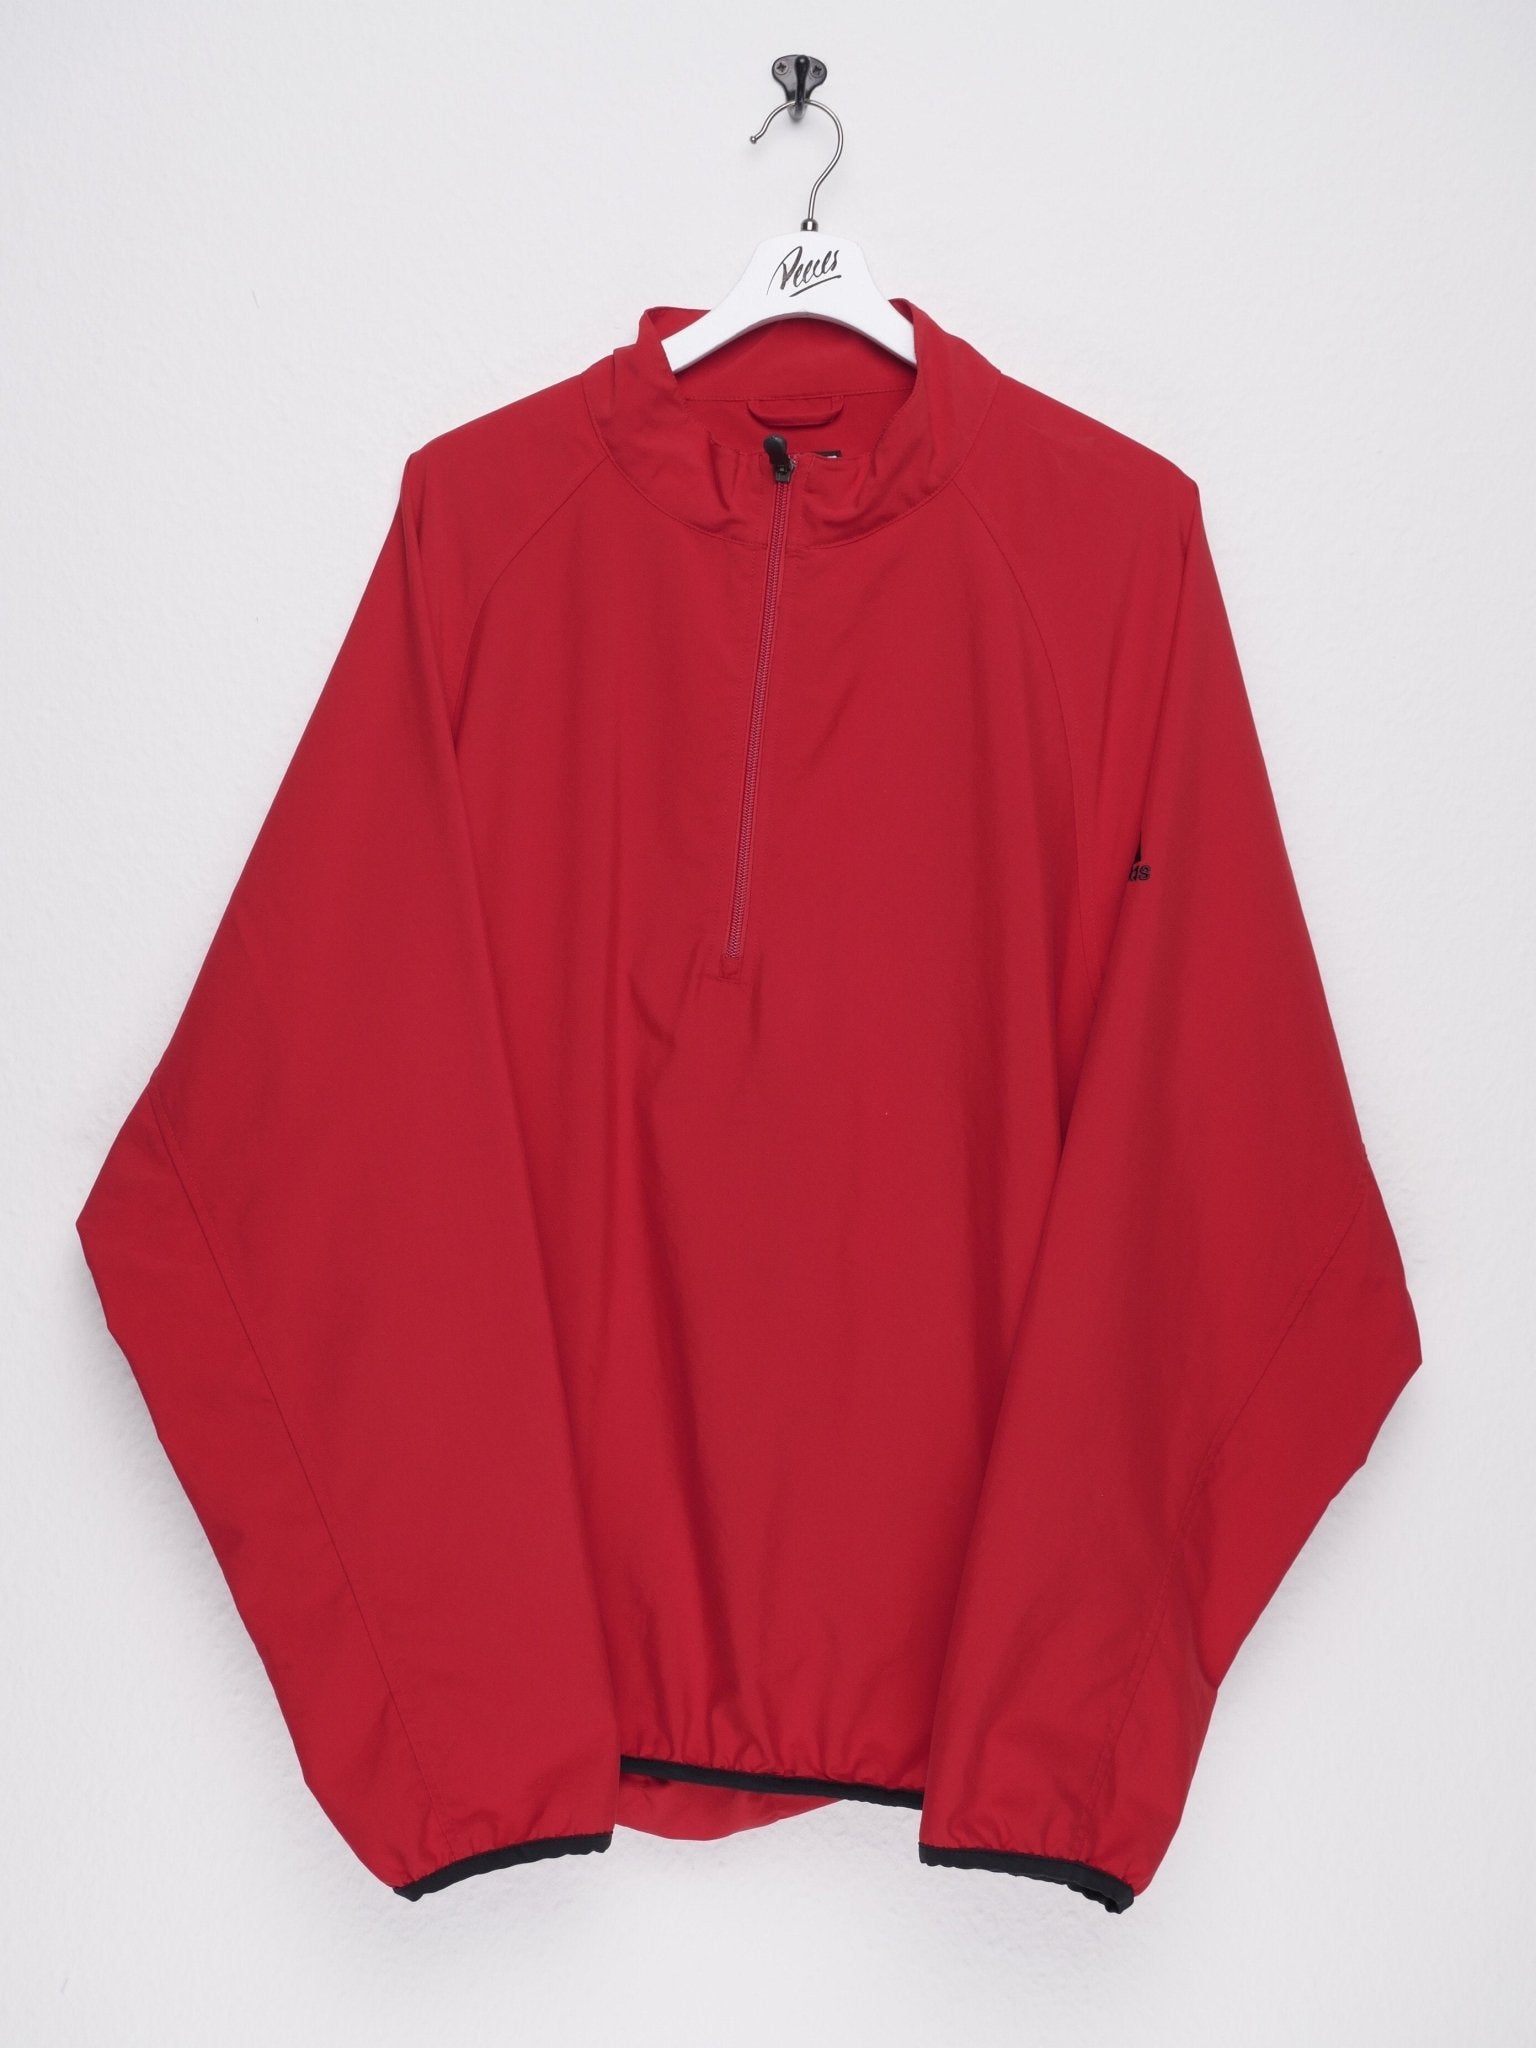 adidas embroidered Logo red Half Zip Jersey Sweater - Peeces